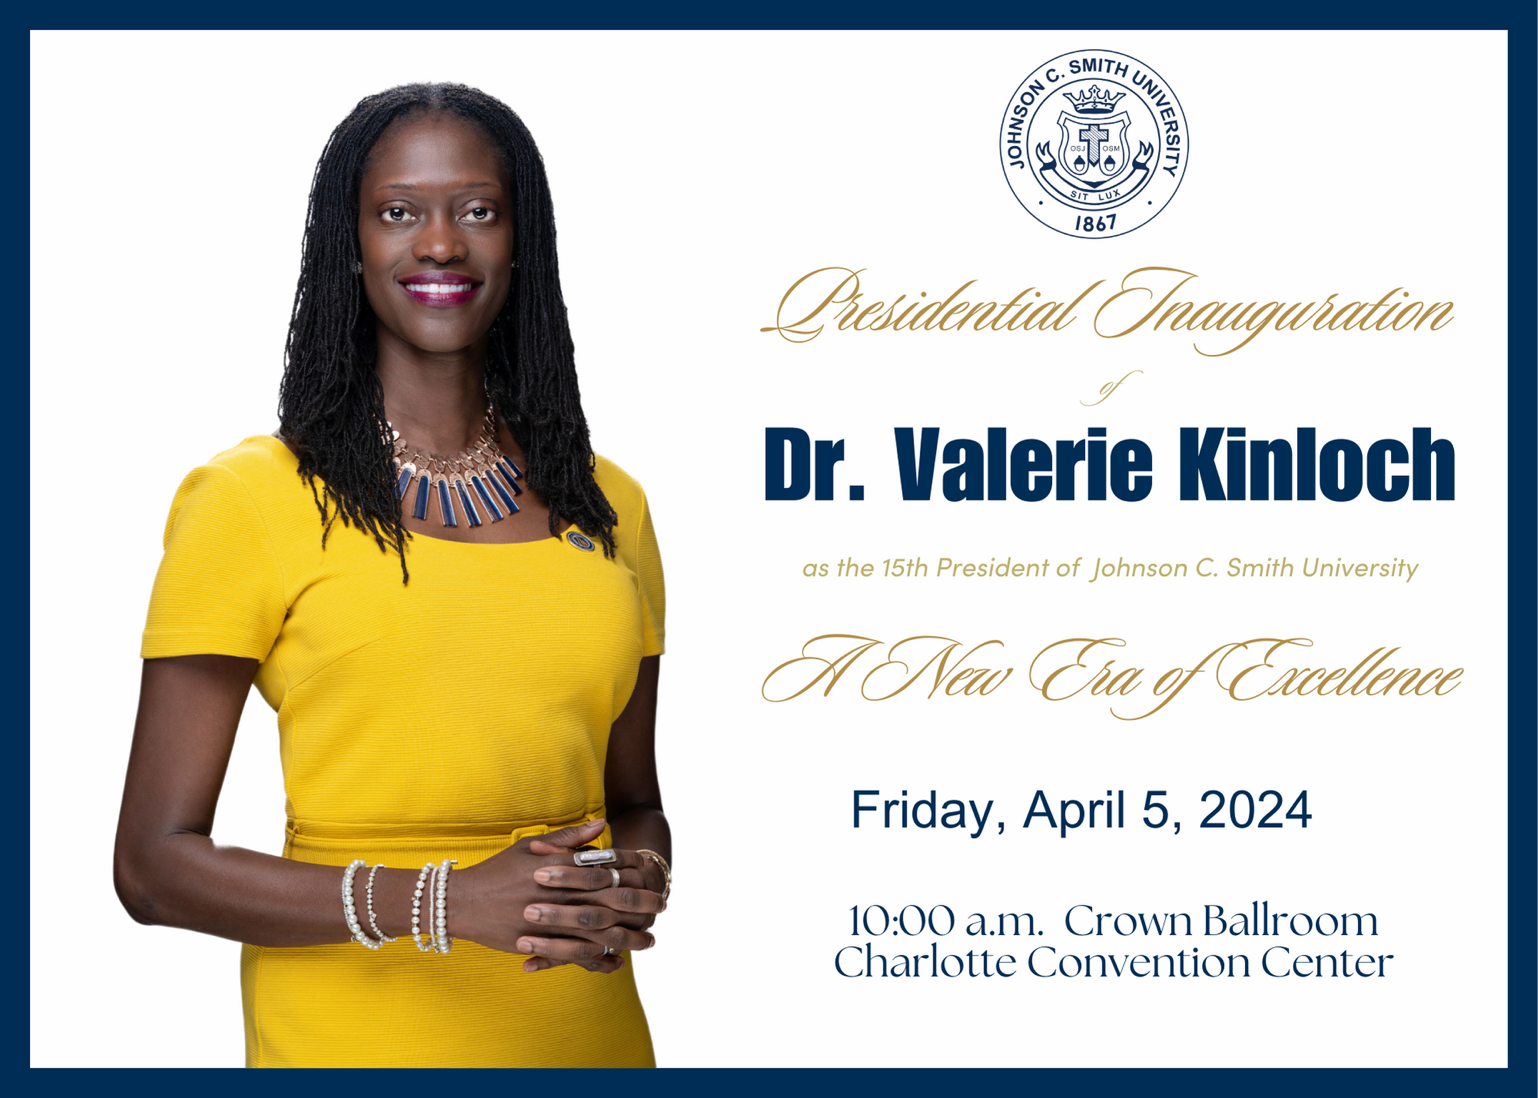 Presidential Inauguration - Dr. Valerie Kinloch as the 15th President of Johnson C. Smith University - Friday, April 5,, 2024 10 a.m. Crown Ballroom Charlotte Convention Center - Parking: NASCAR Hall of Fame Parking 500 S. Brevard St. Charlotte, NC 28202